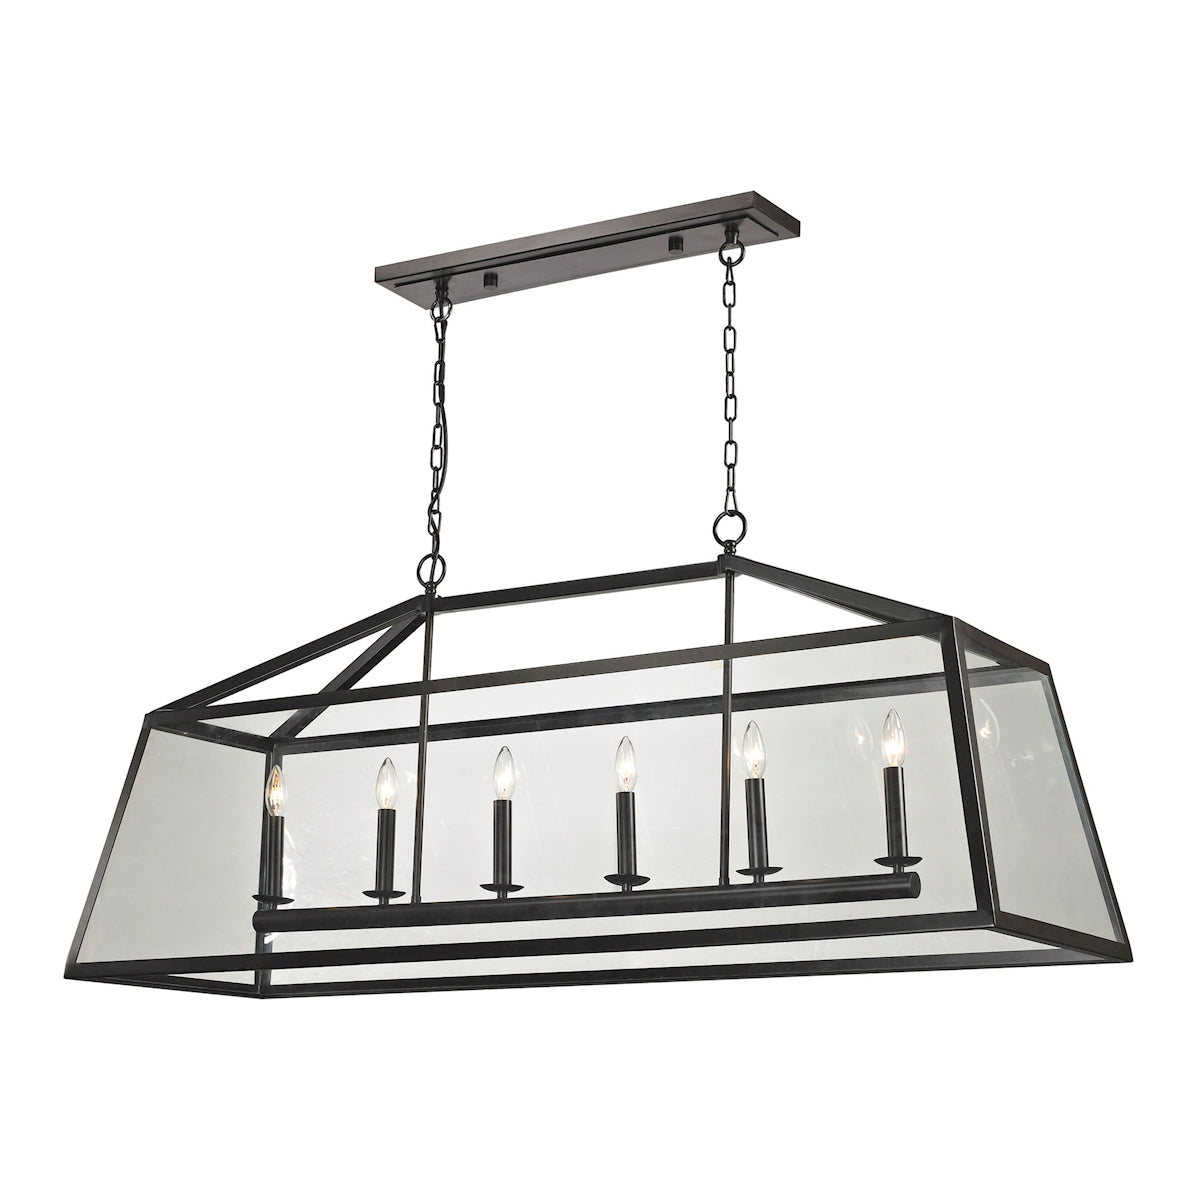 ELK Lighting 31509/6 Alanna 6-Light Linear Chandelier in Oil Rubbed Bronze with Clear Glass Panels